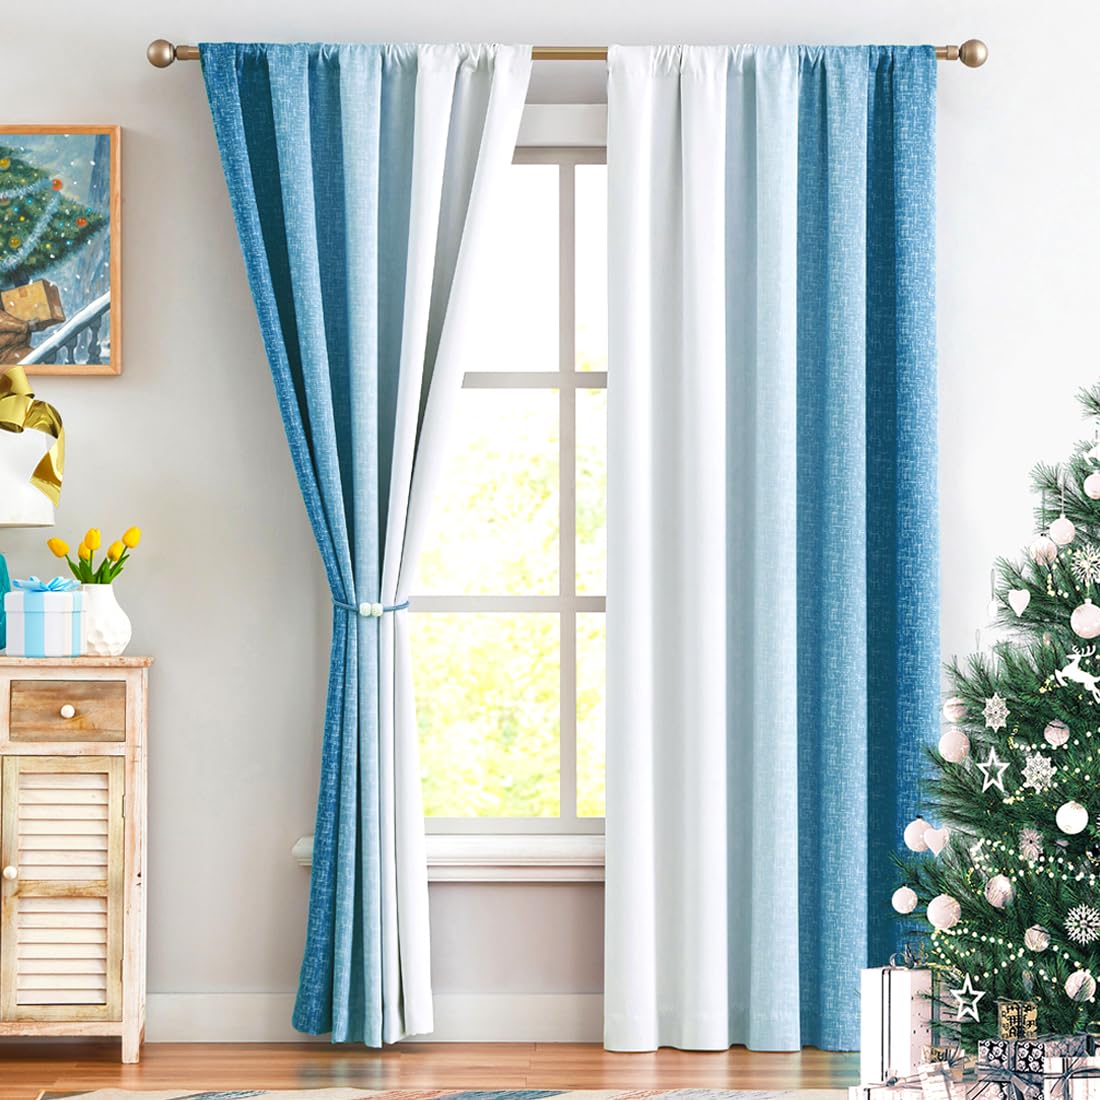 Geomoroccan Ombre Full Blackout Curtains 54 Inches Length, Blue and White 2 Tone Reversible Christmas Window Treatments for Bedroom Living R